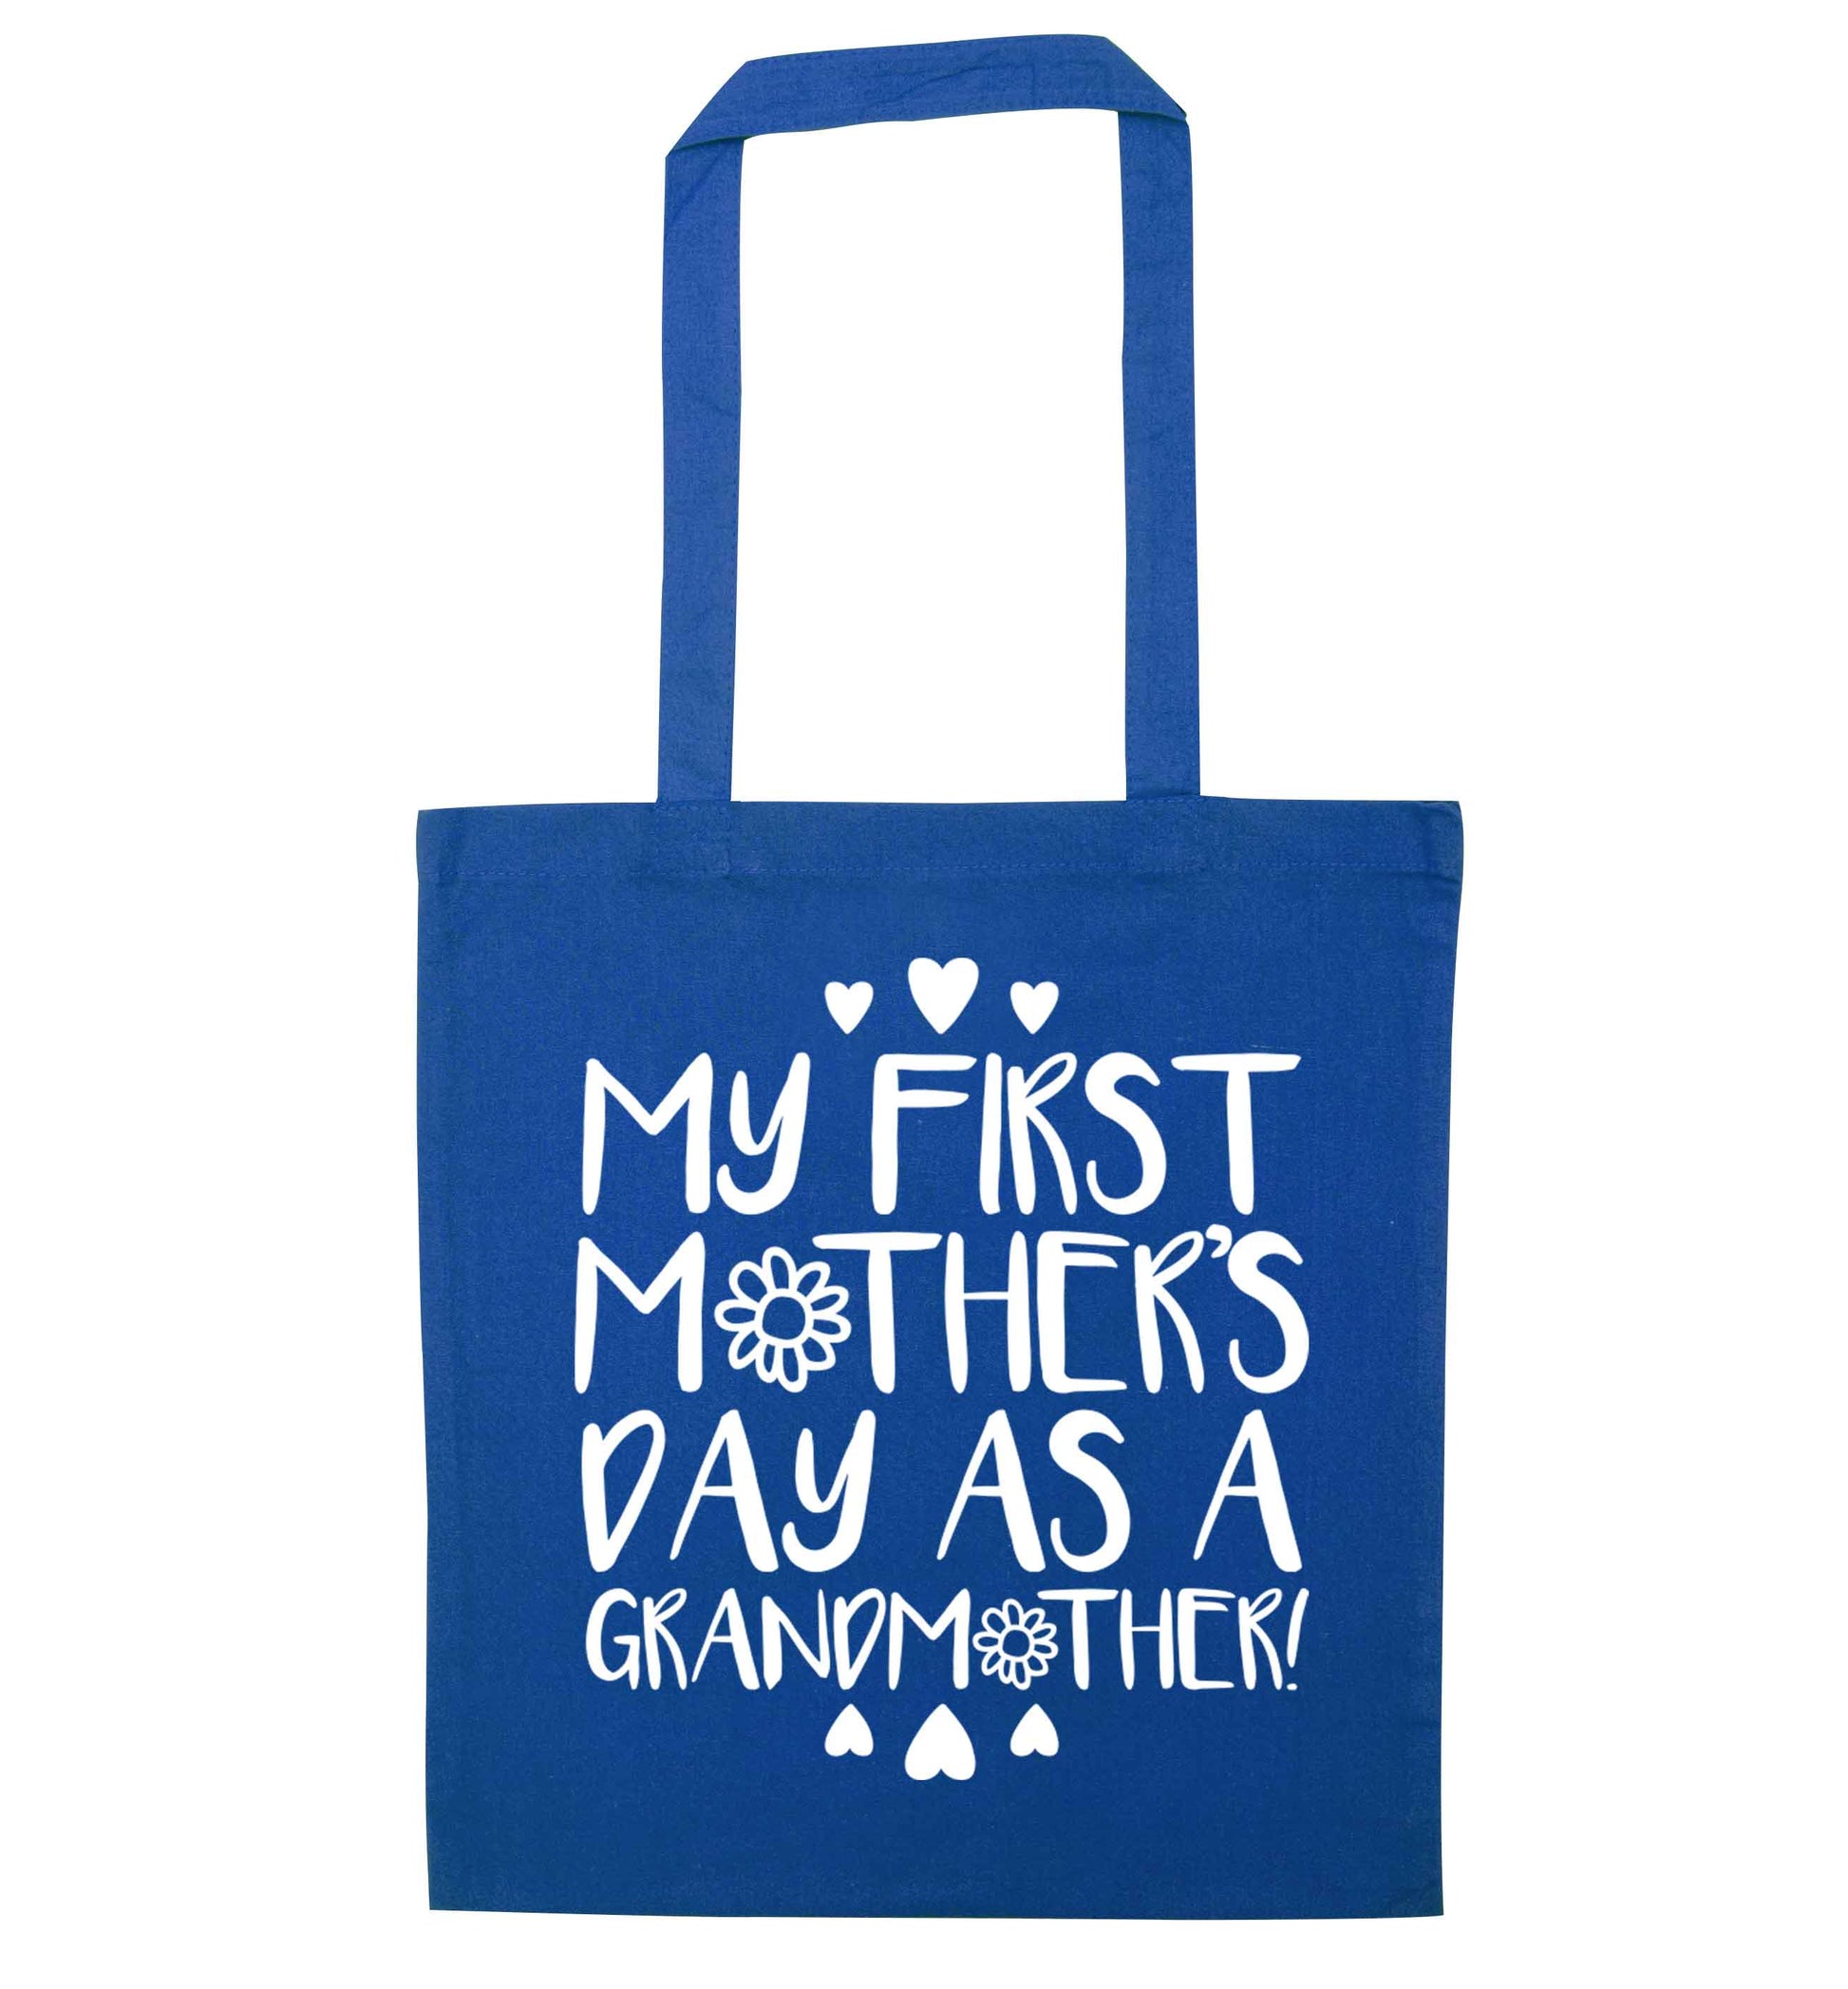 It's my first mother's day as a grandmother blue tote bag